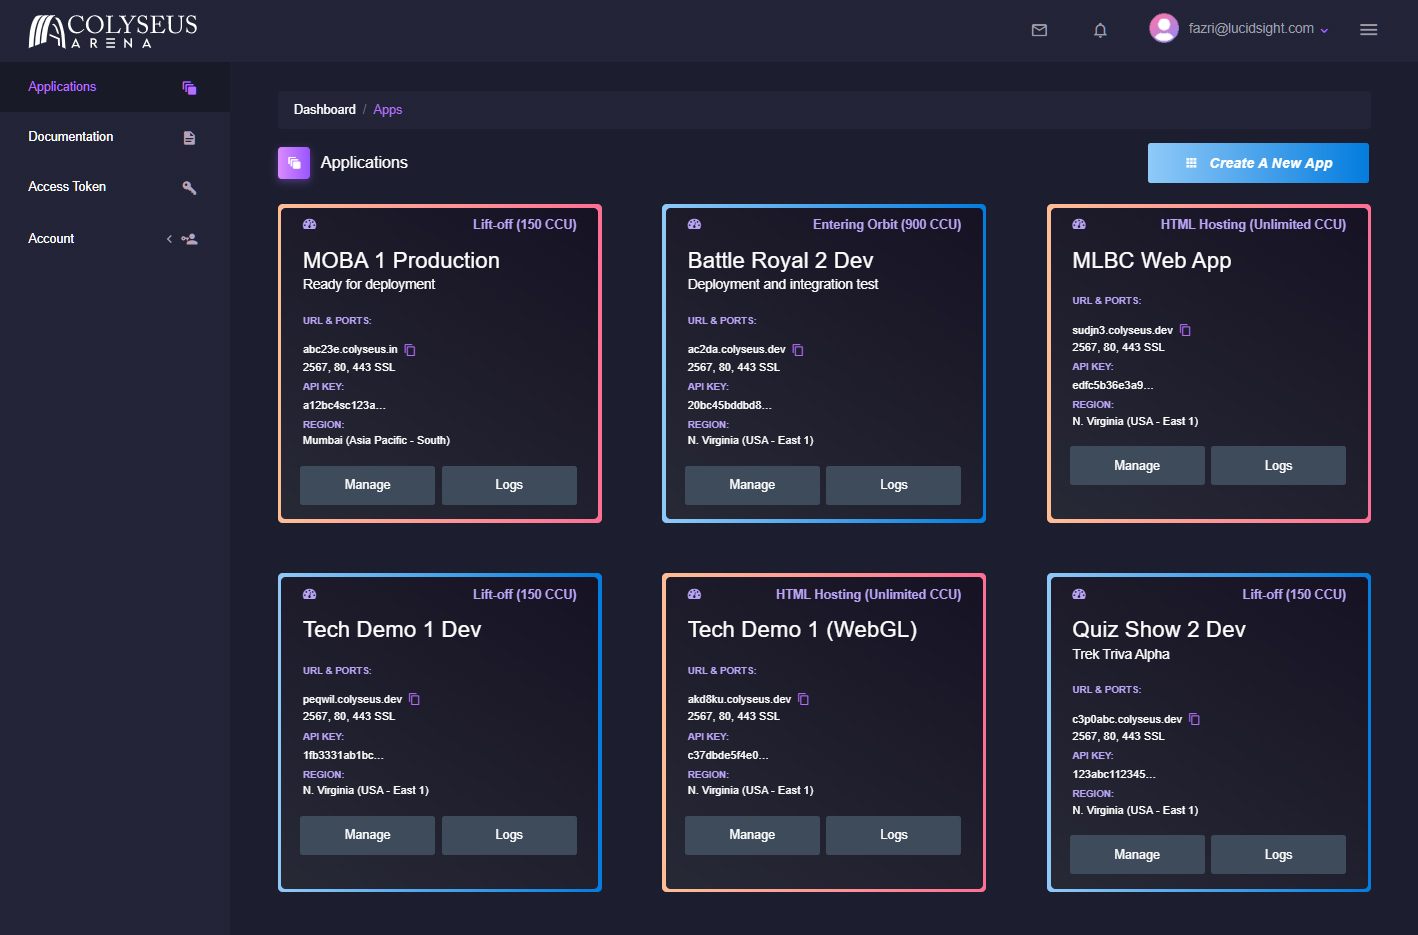 Arena Dashboard View